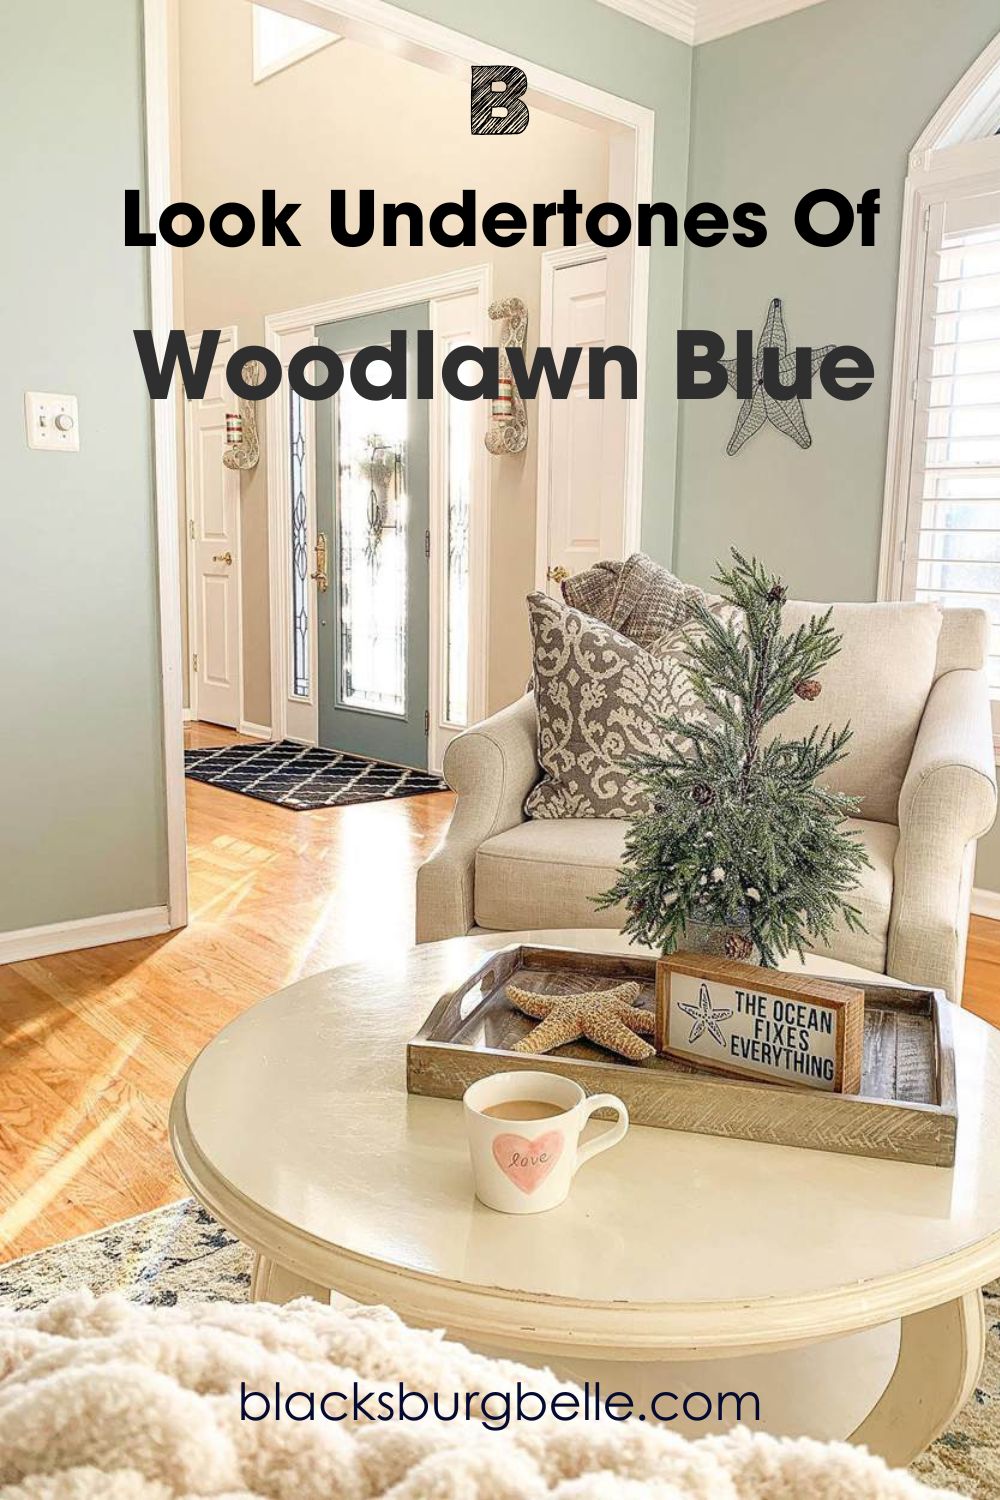 Picking Up on the Undertones of Woodlawn Blue